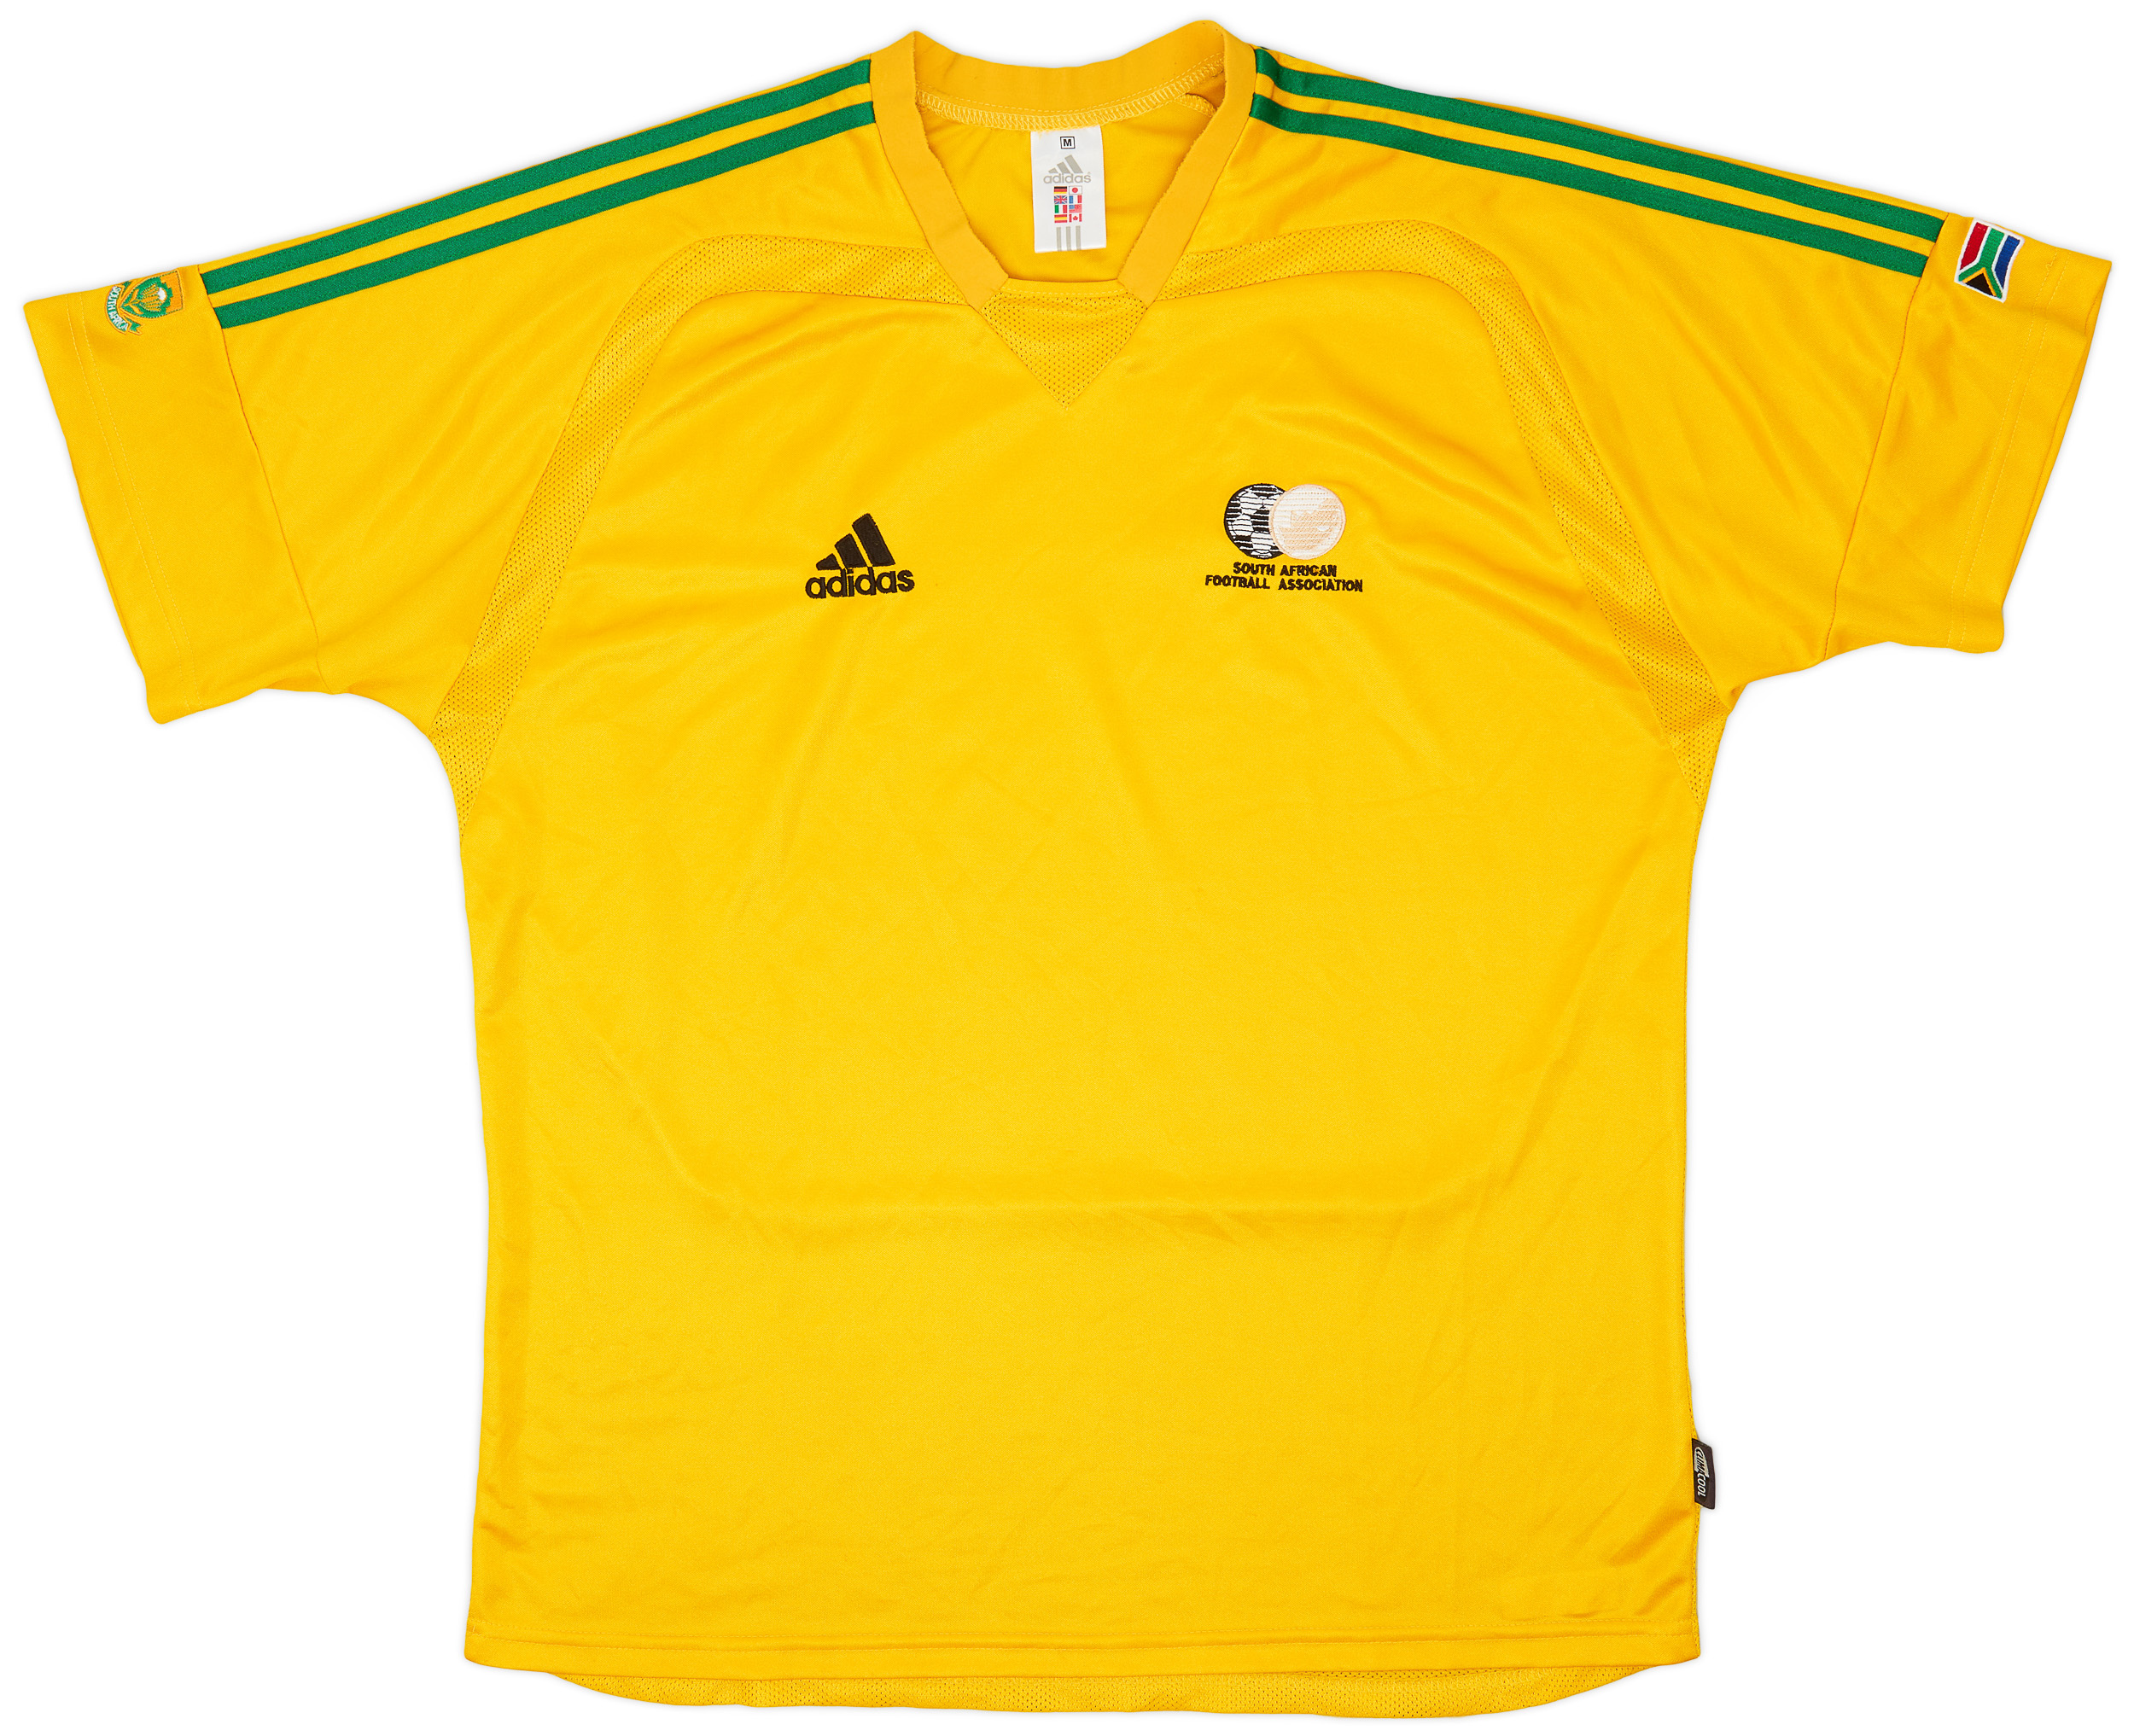 2004-06 South Africa Home Shirt - 9/10 - ()